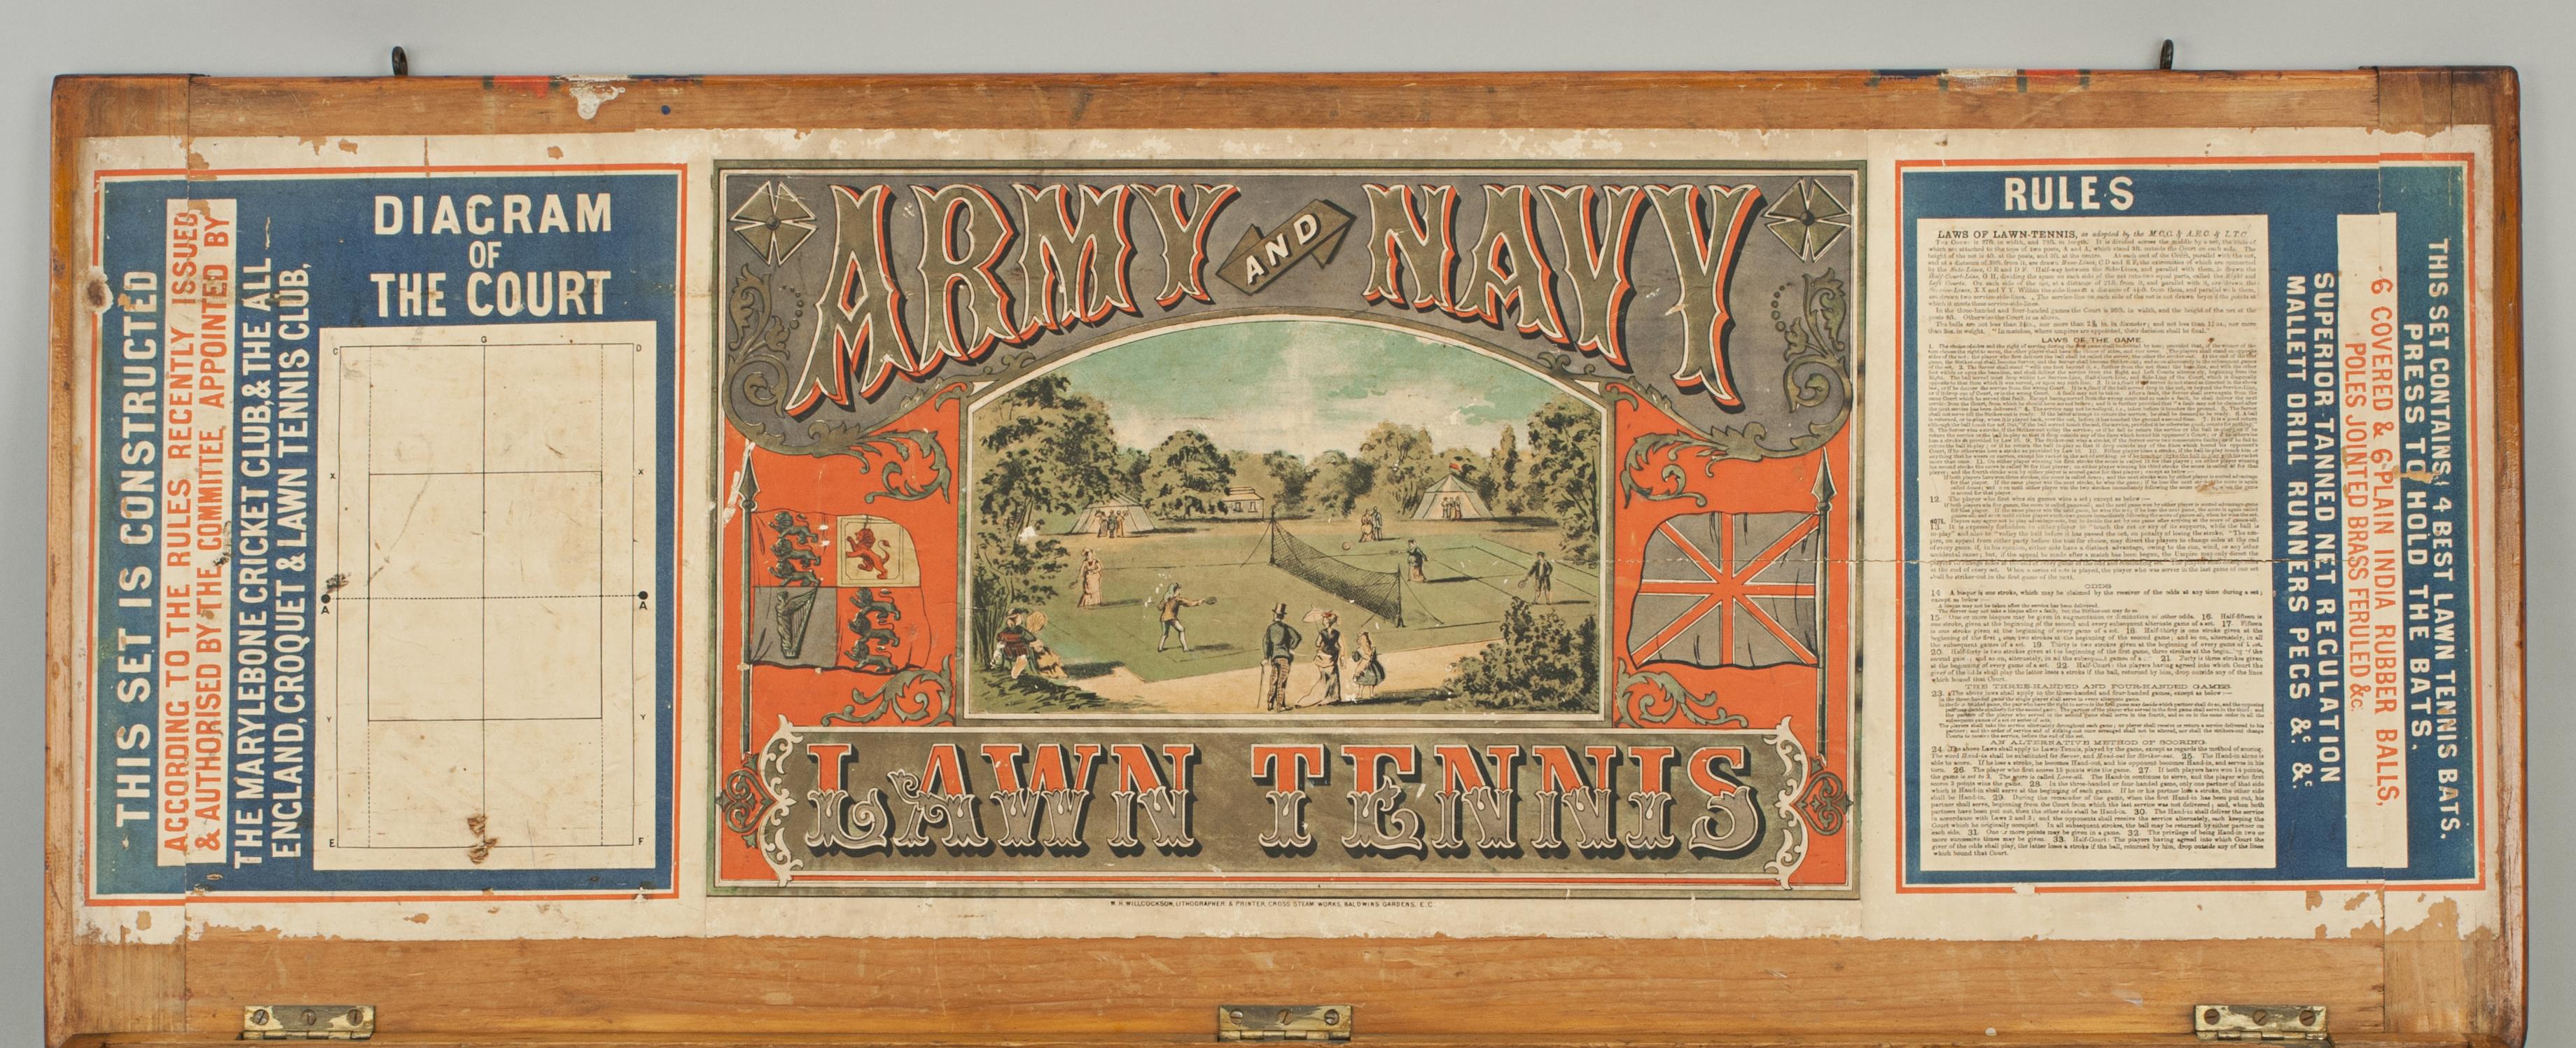 Late 18th Century Antique Lawn Tennis Box with Poster, Army and Navy, 1870, s